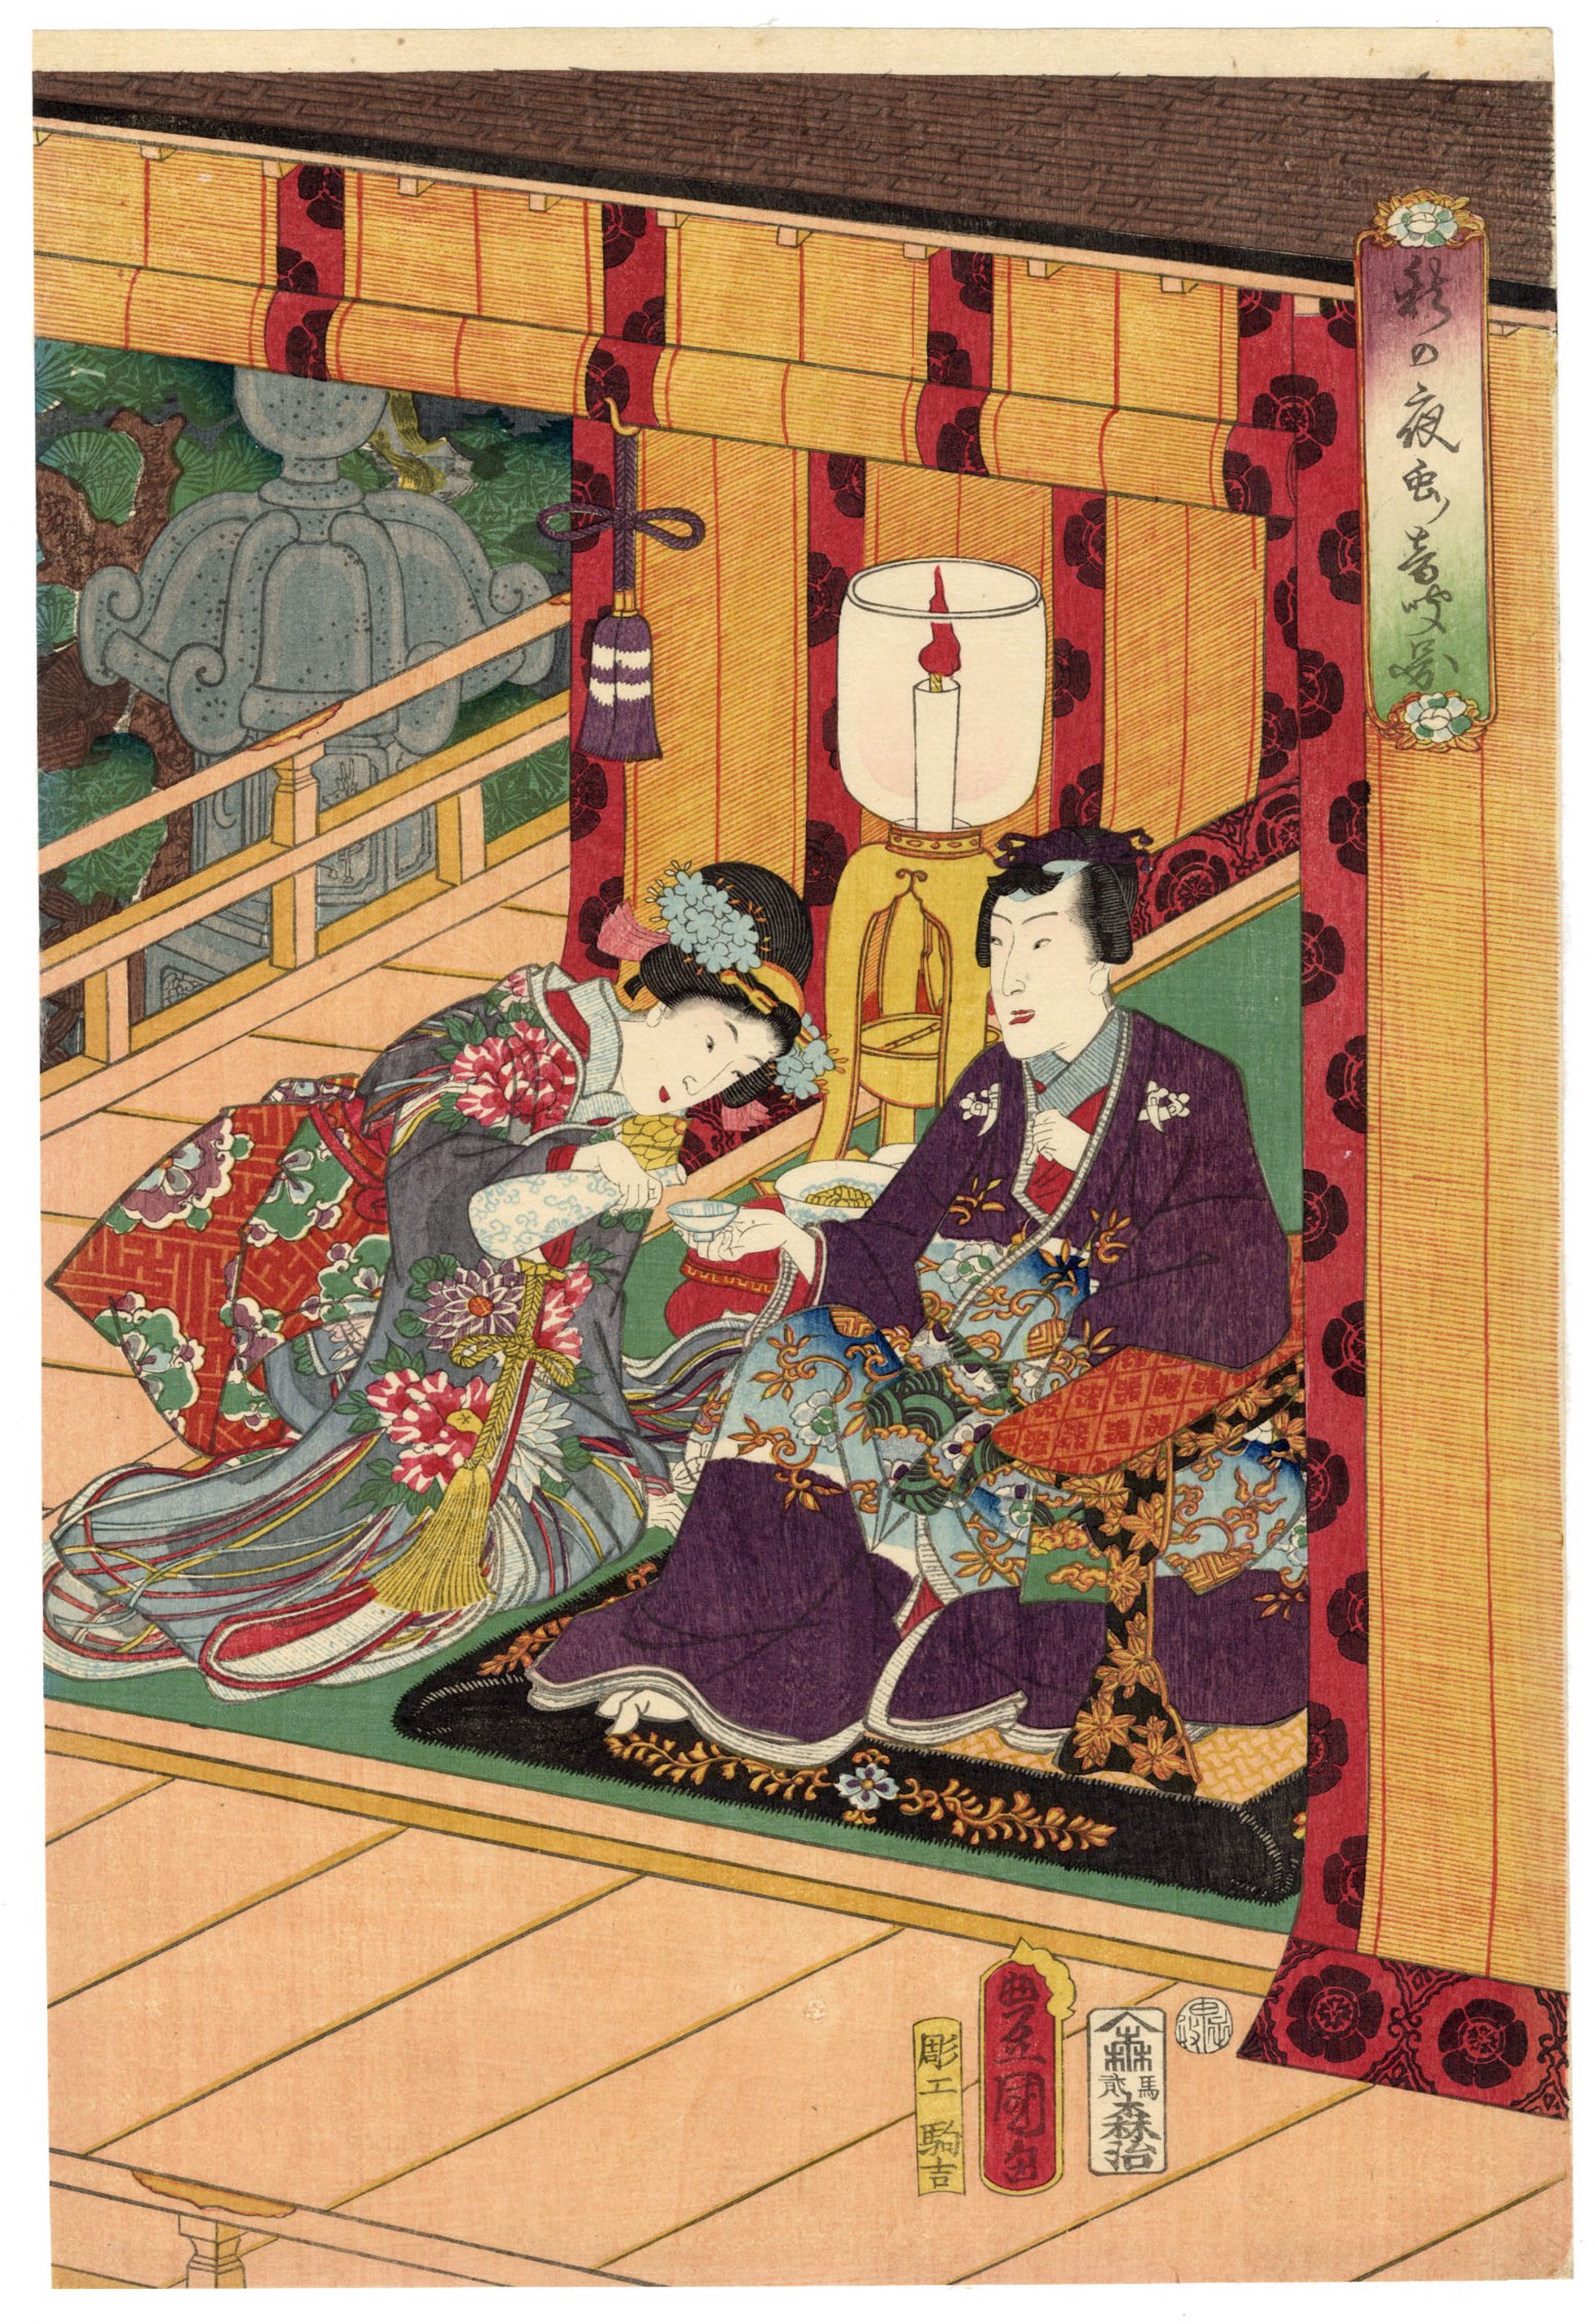 Listening to the Sound of crickets on an Autumn Evening by Kunisada